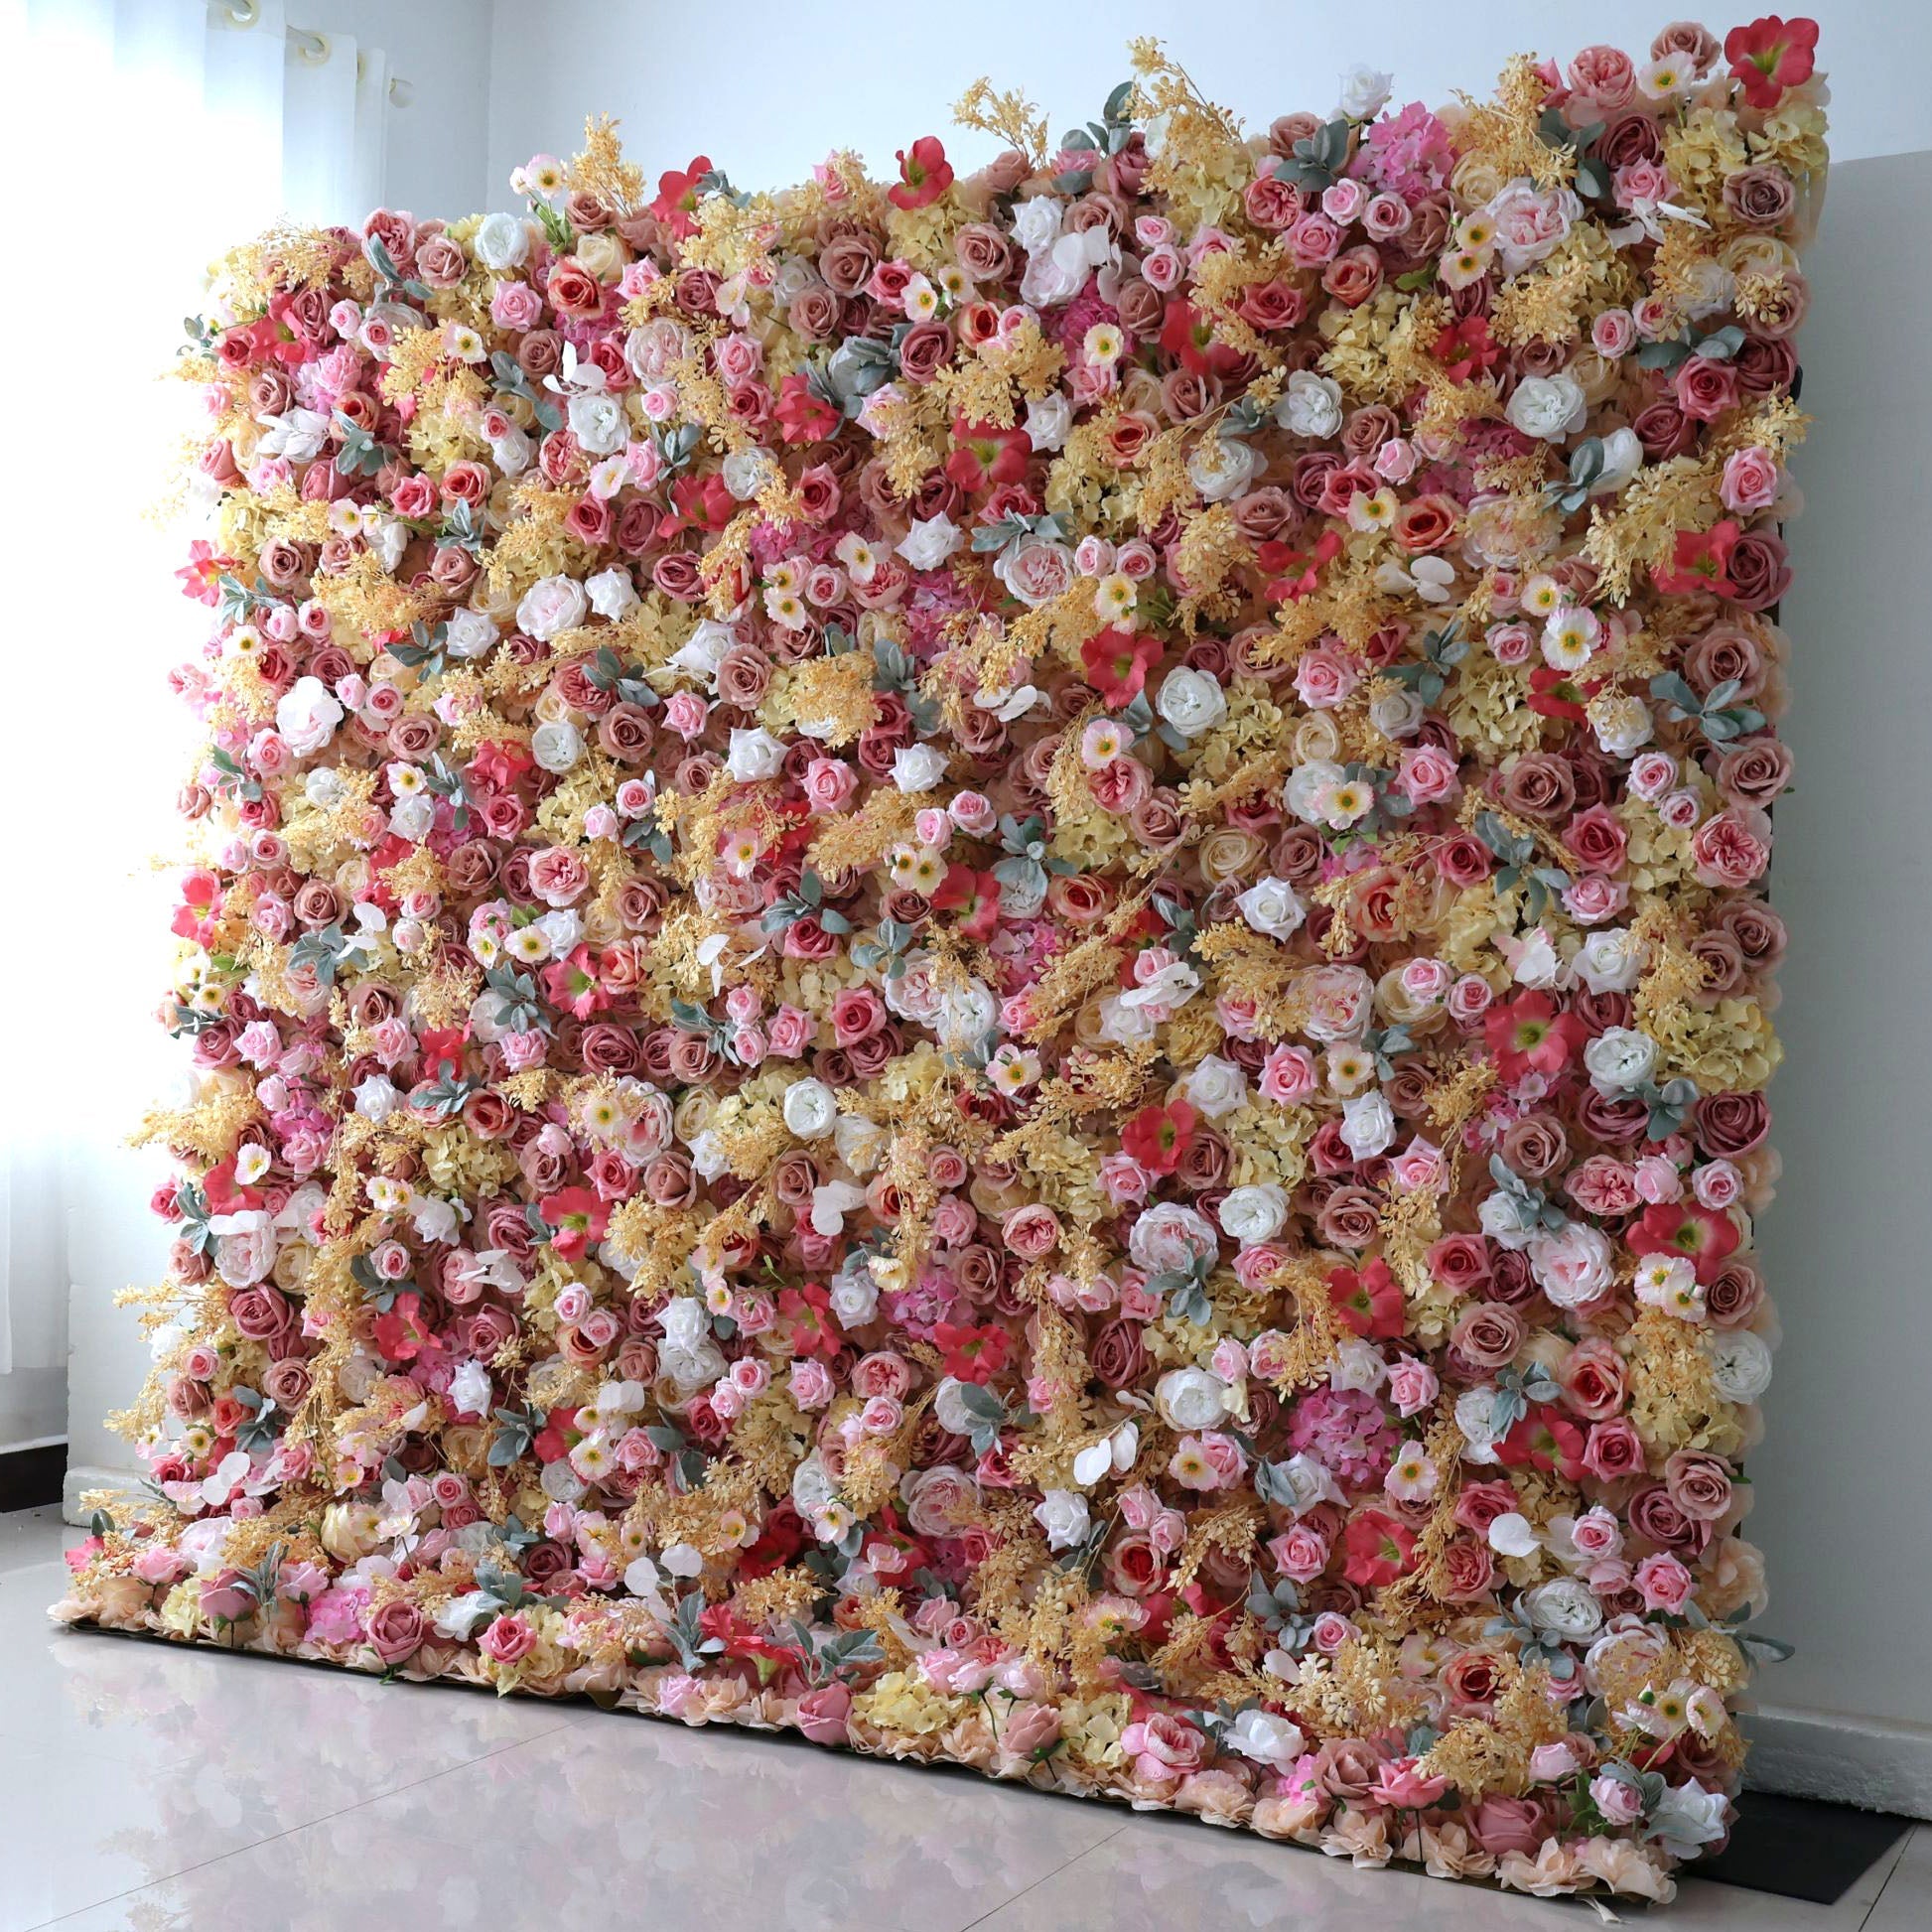 Valar Flowers roll up fabric artificial flower wall for wedding backdrop, floral party decor, and event photography, model VF-3293